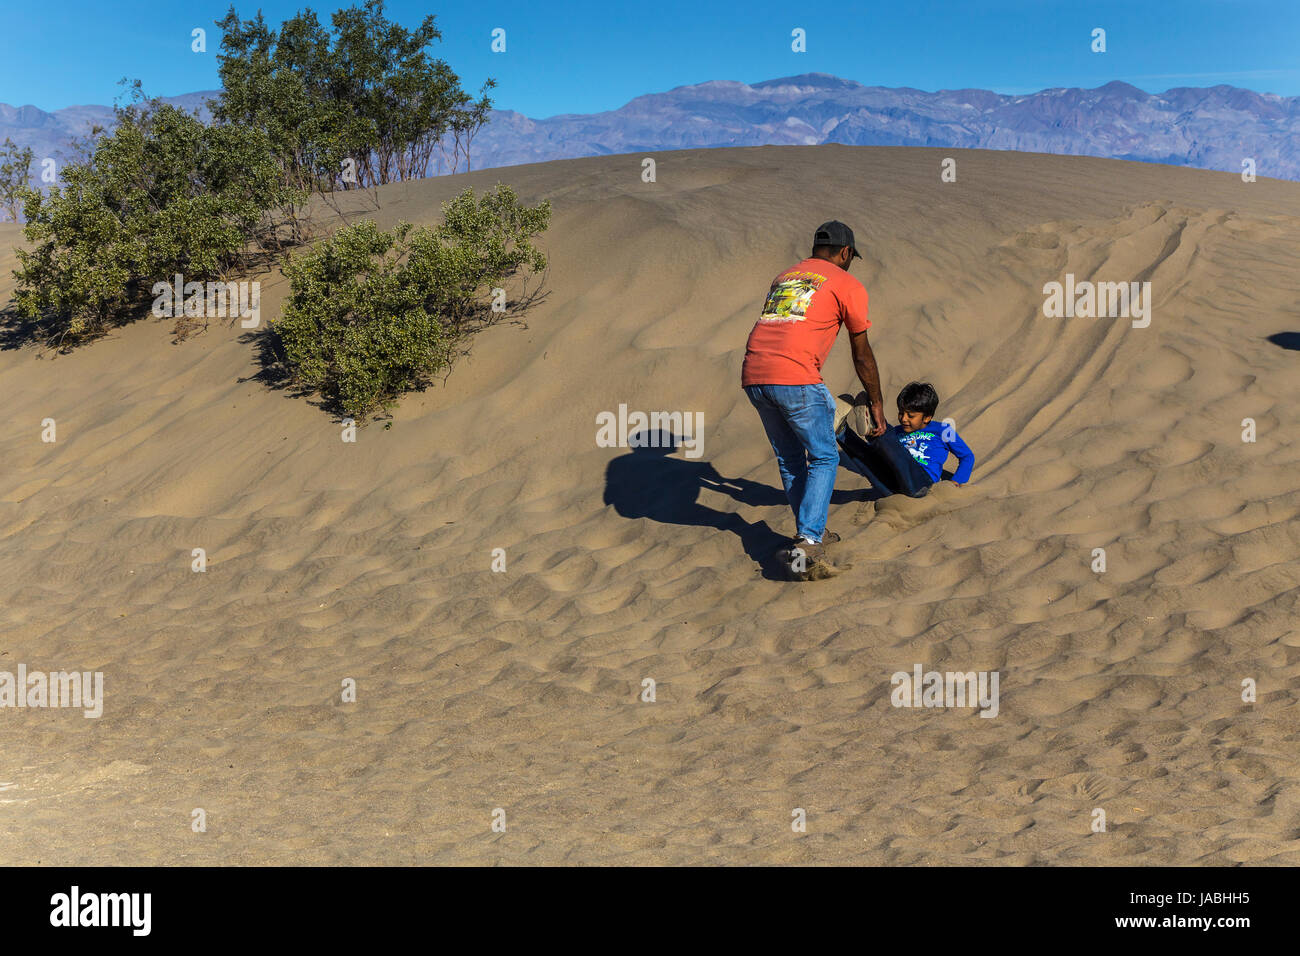 people, tourists, father and son, playing, sliding on sand, Mesquite Flat Sand Dunes, Death Valley National Park, Death Valley, California Stock Photo